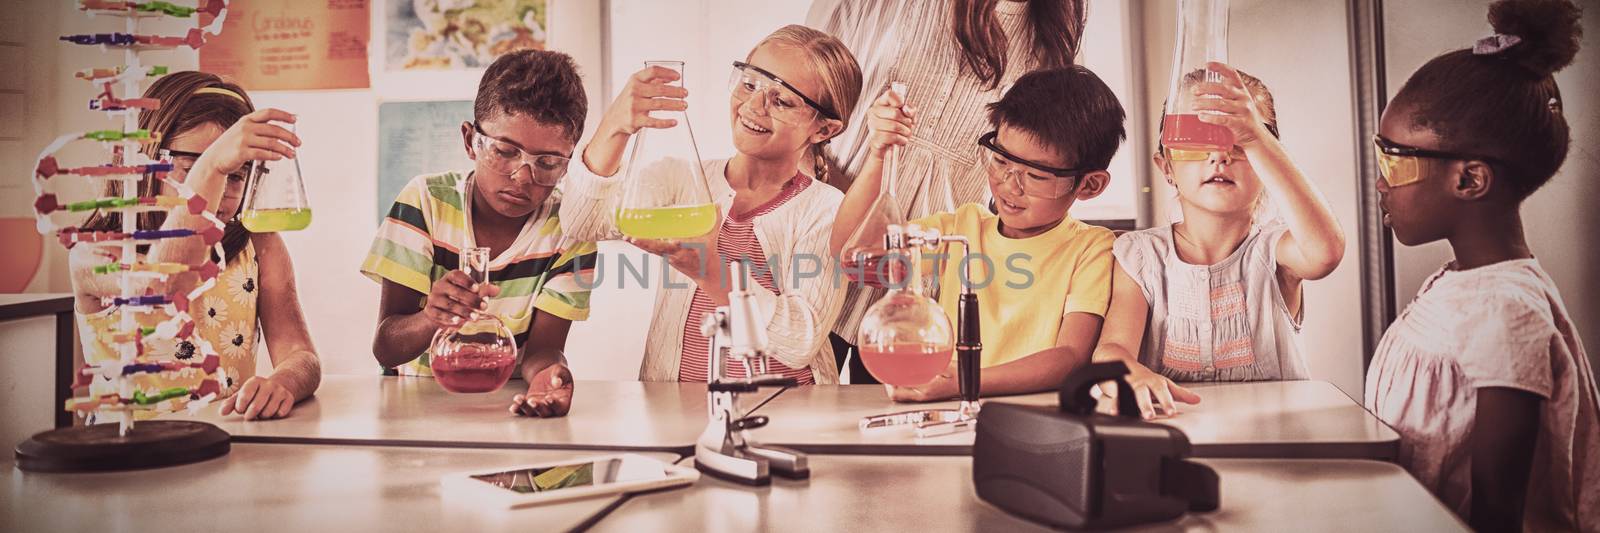 Smiling children doing science project in classroom